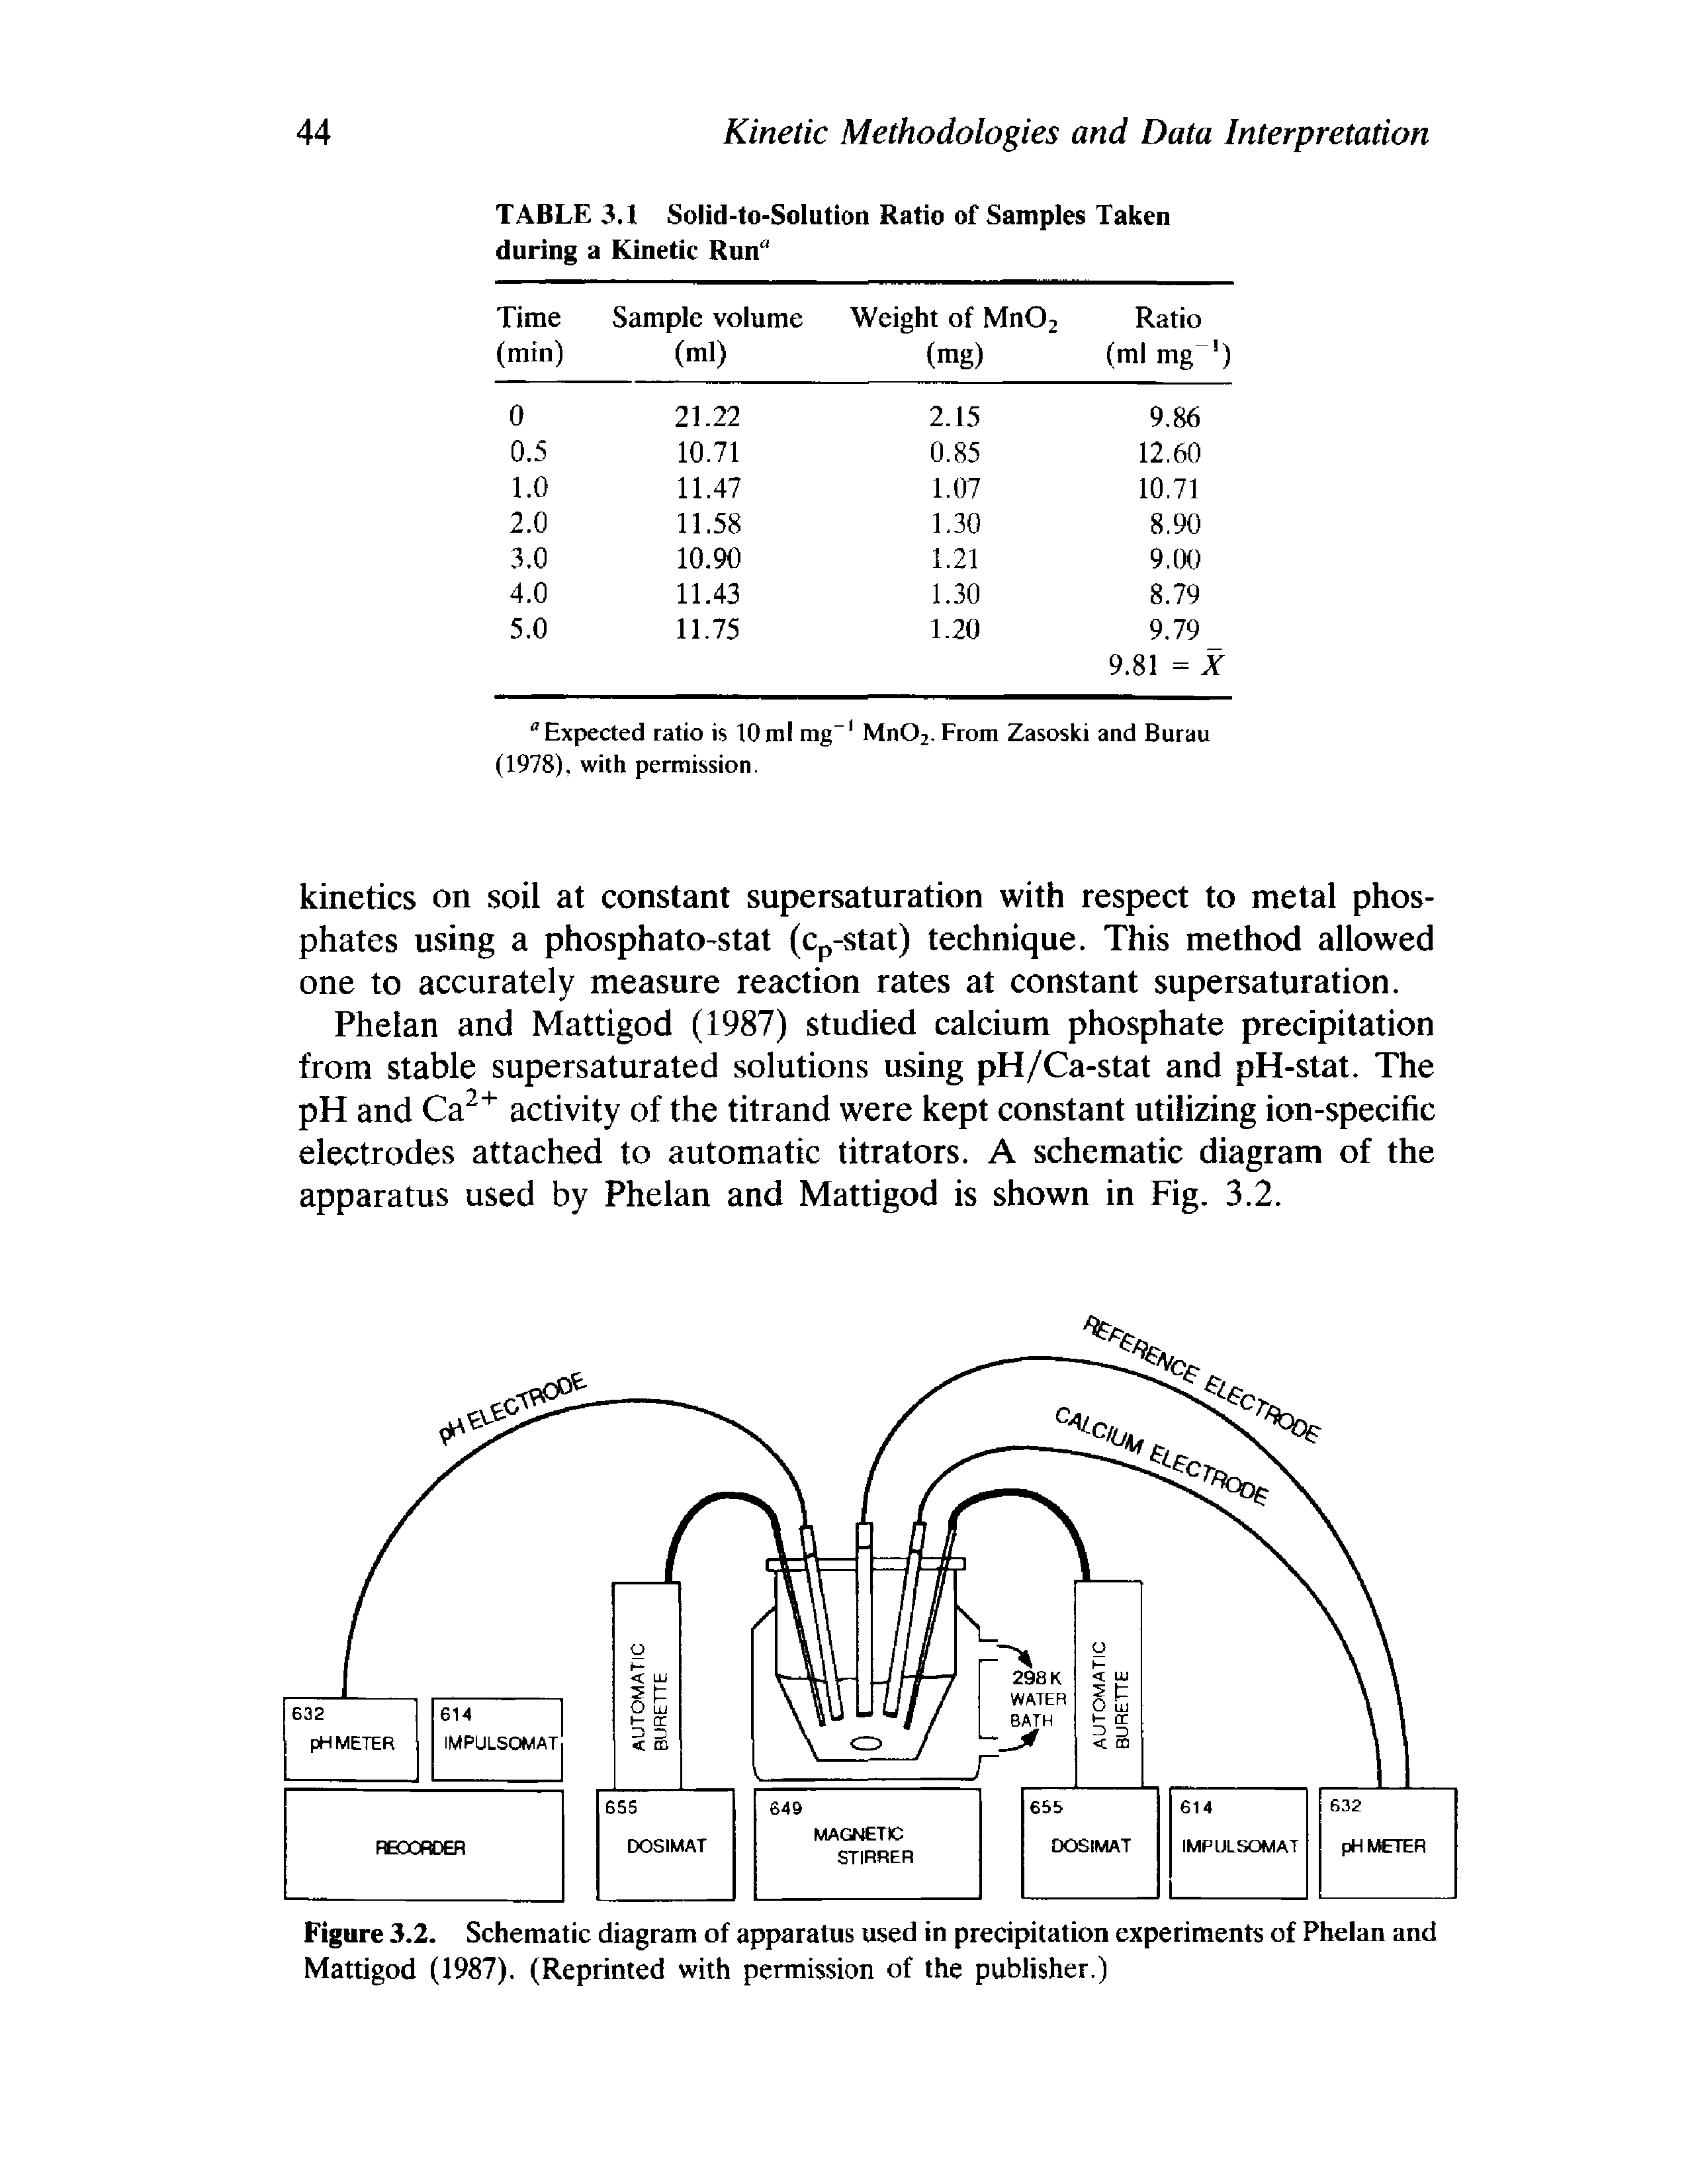 Figure 3.2. Schematic diagram of apparatus used in precipitation experiments of Phelan and Mattigod (1987). (Reprinted with permission of the publisher.)...